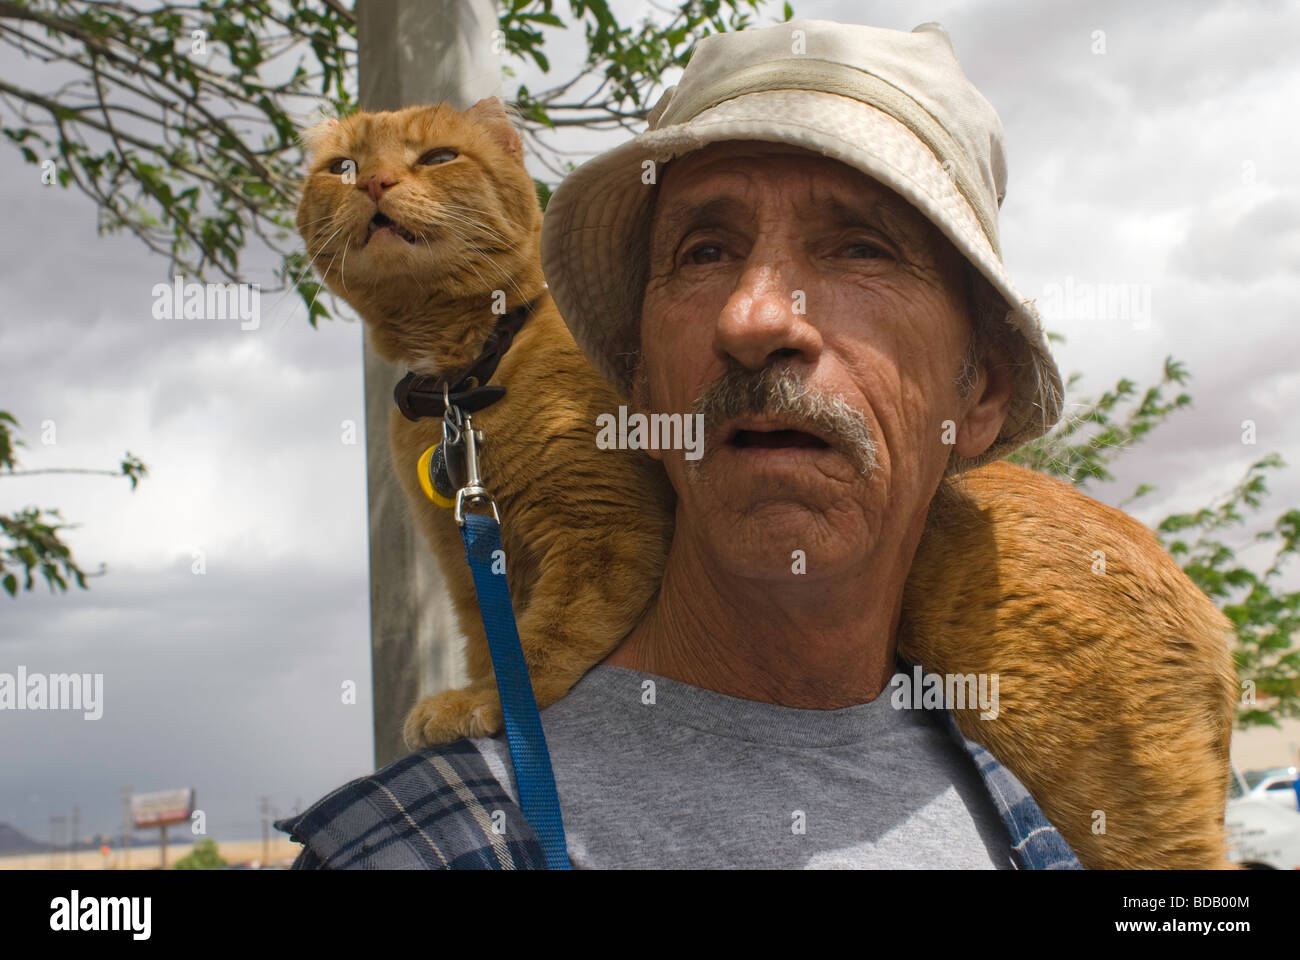 A man watches the Easter parade with his pet cat on a leash. Stock Photo